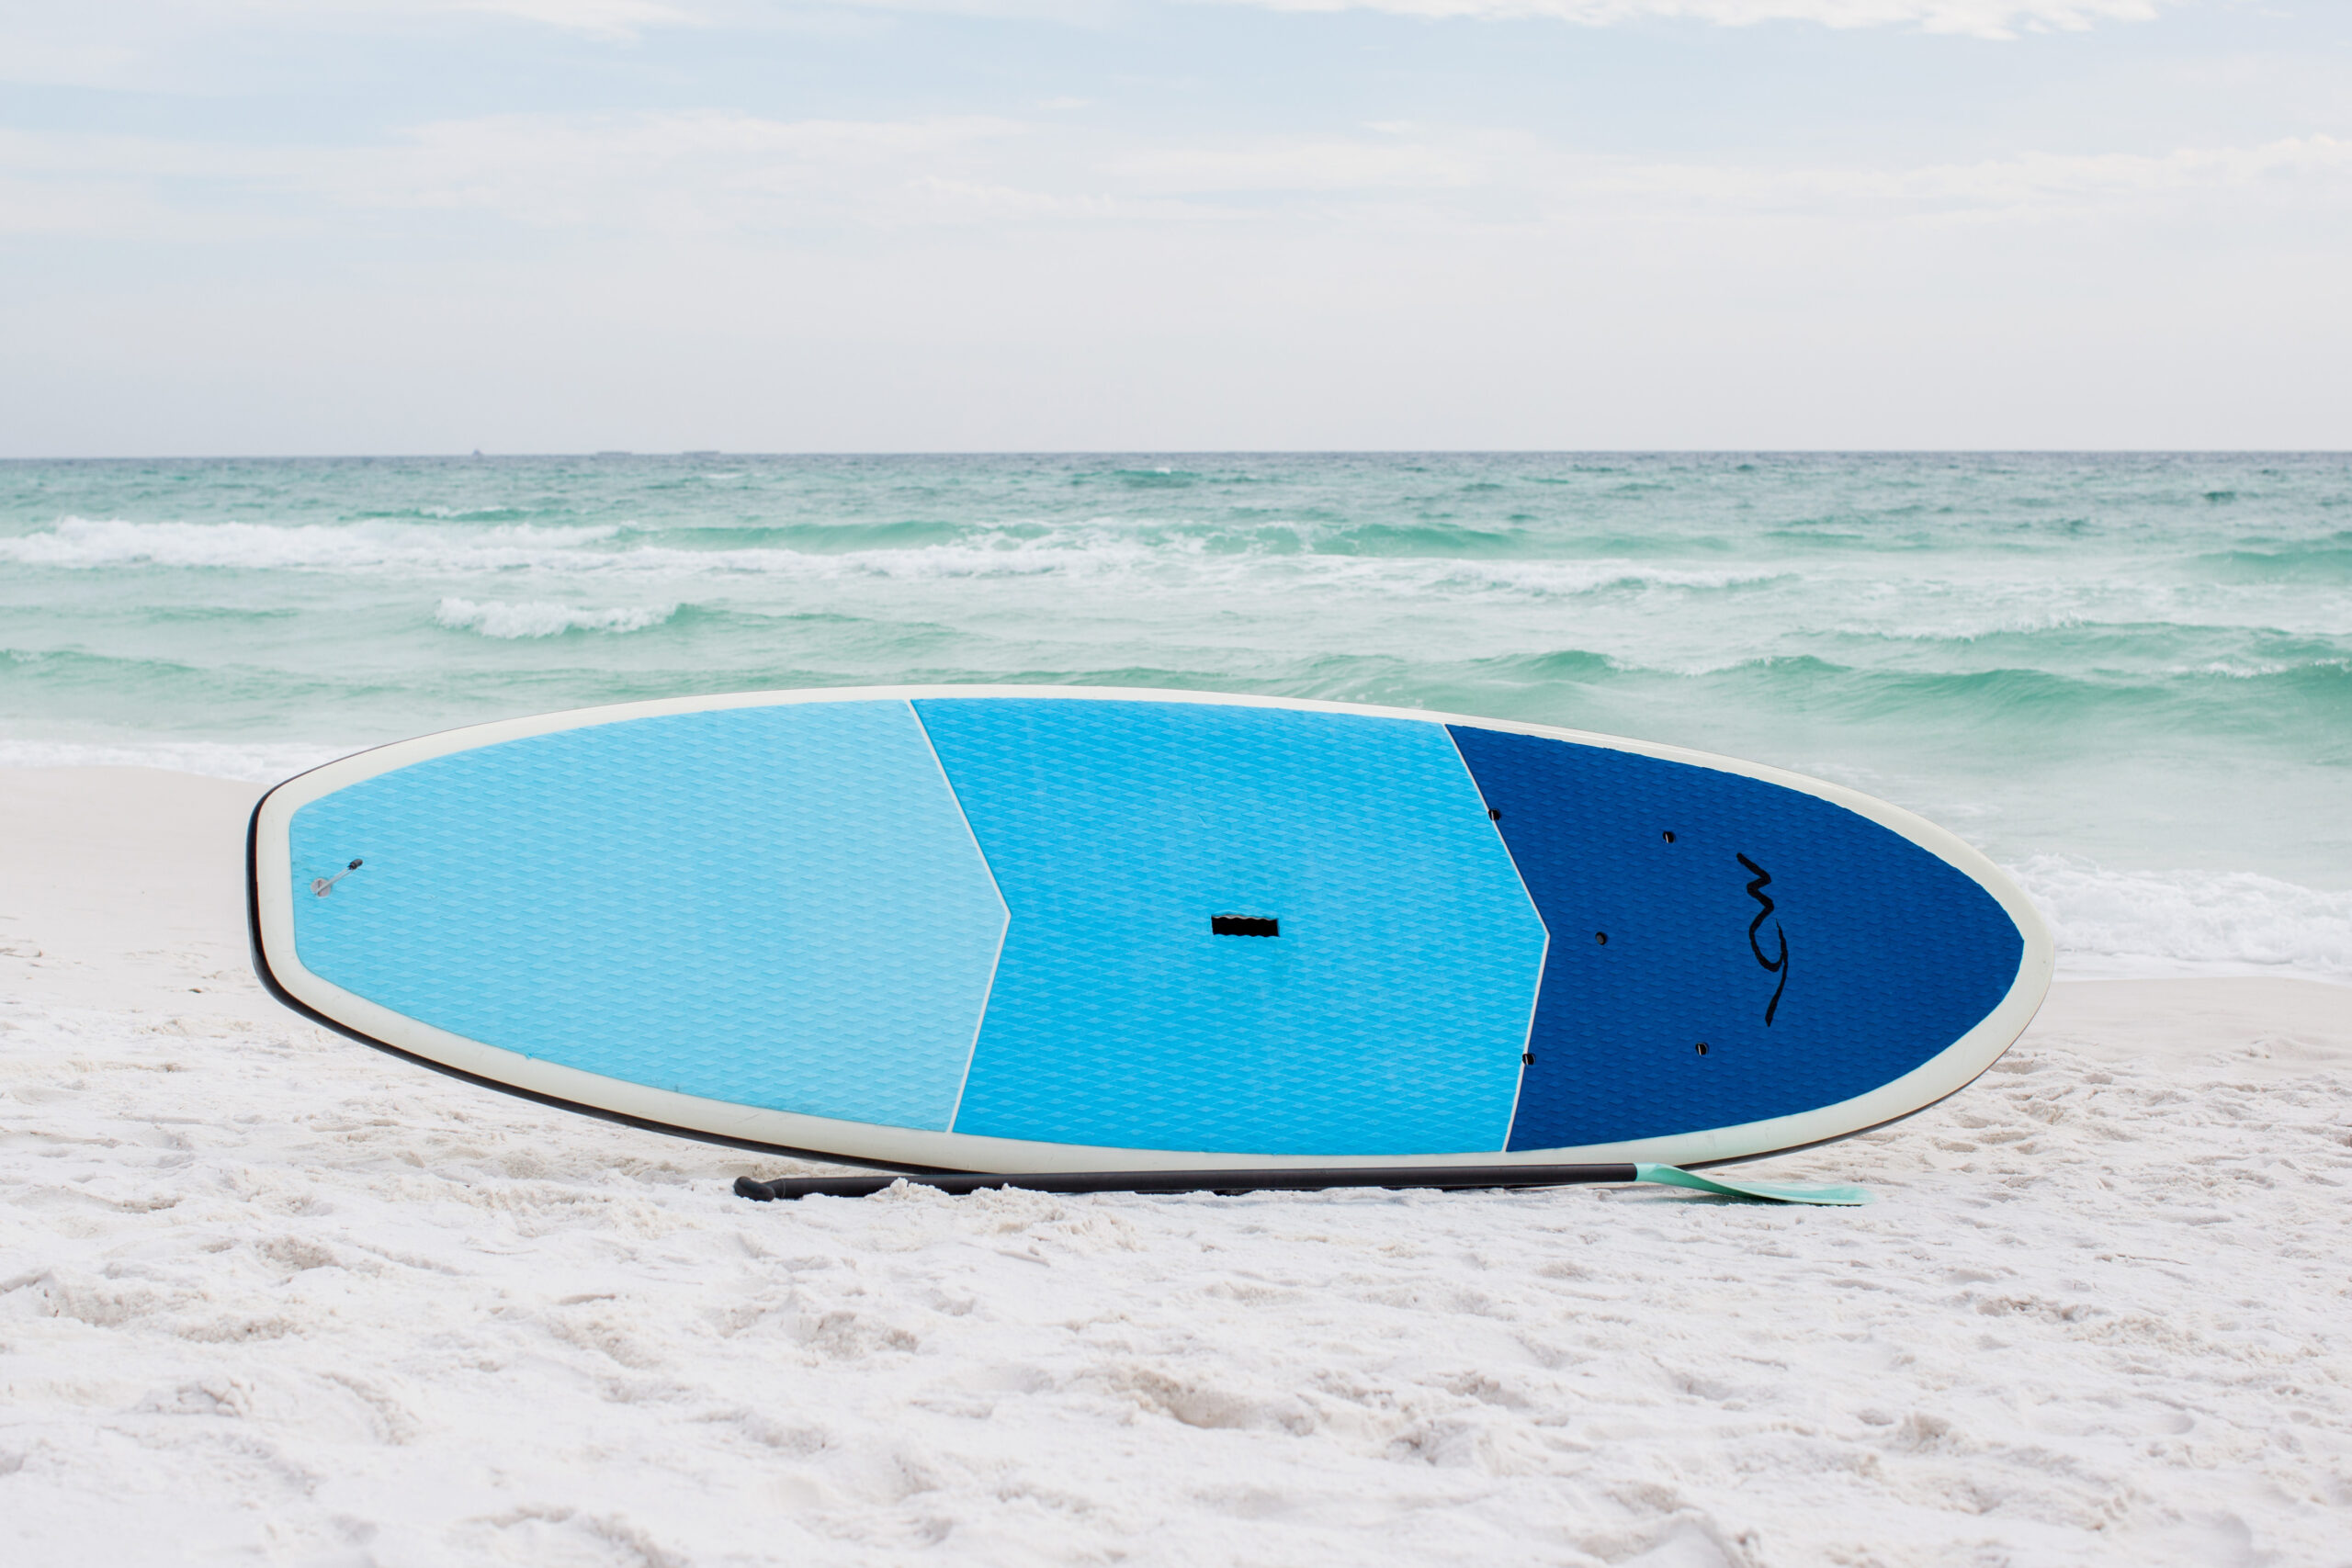 A surfboard sitting on top of the sand near the ocean.